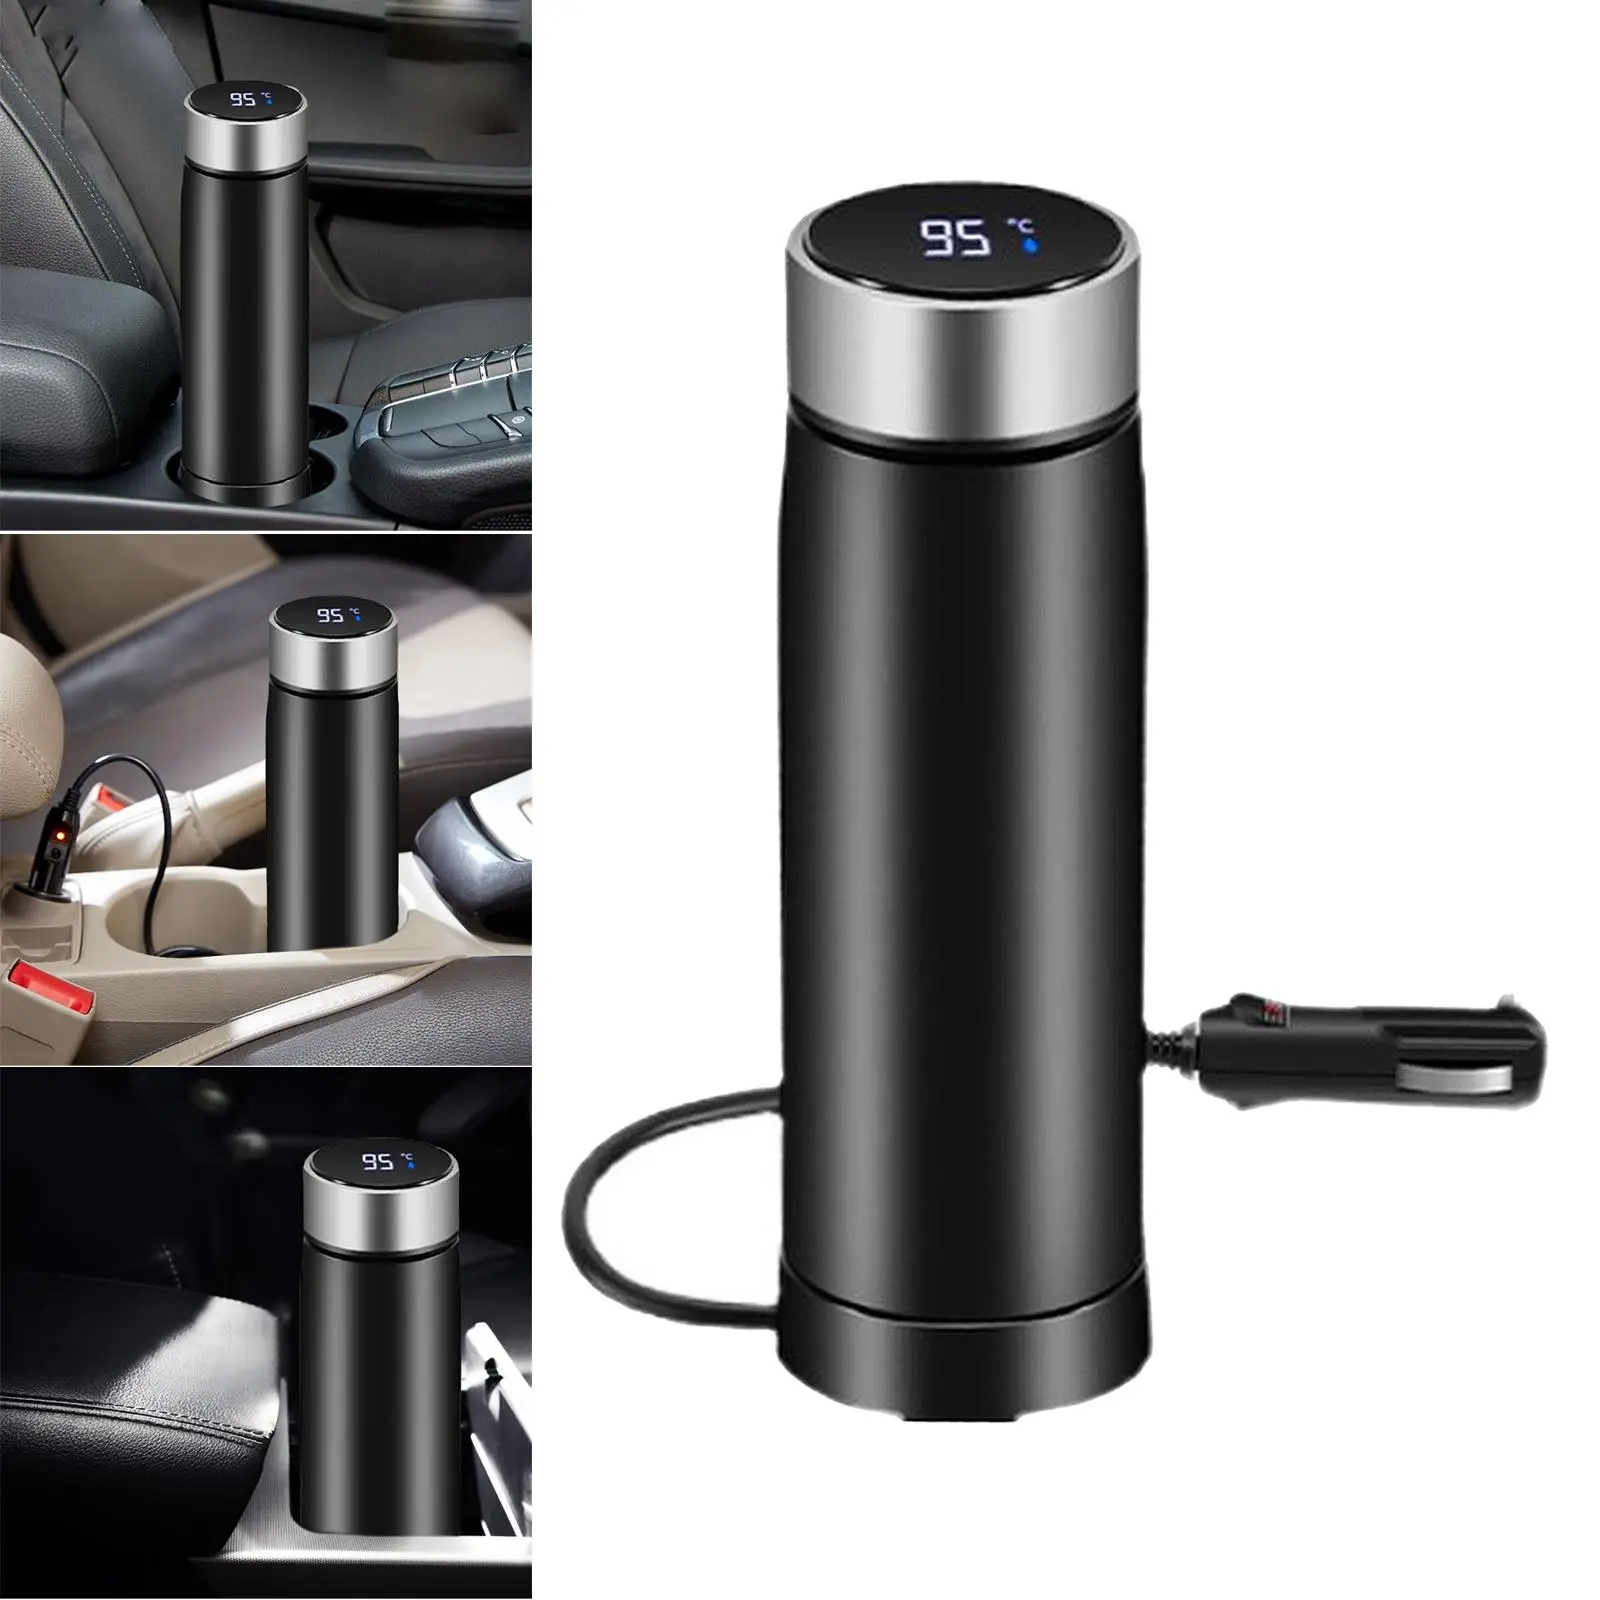 Stainless Heating Cup Intelligent Cup Heater Car Bottle Warmer